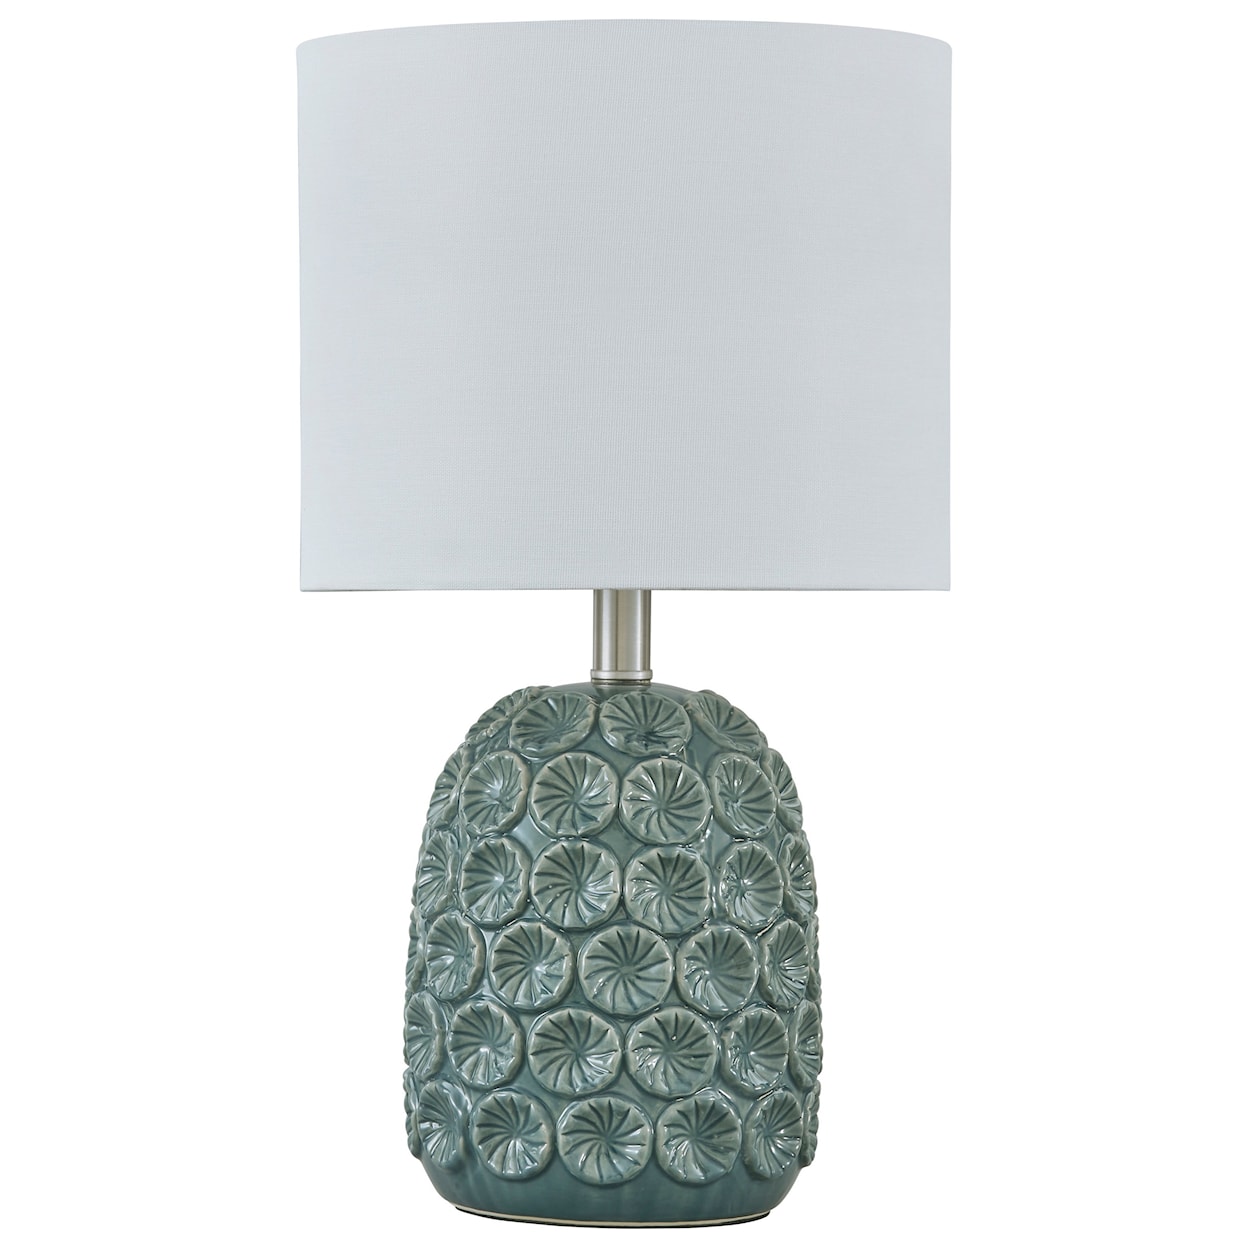 Signature Design by Ashley Lamps - Casual Moorbank Teal Ceramic Table Lamp